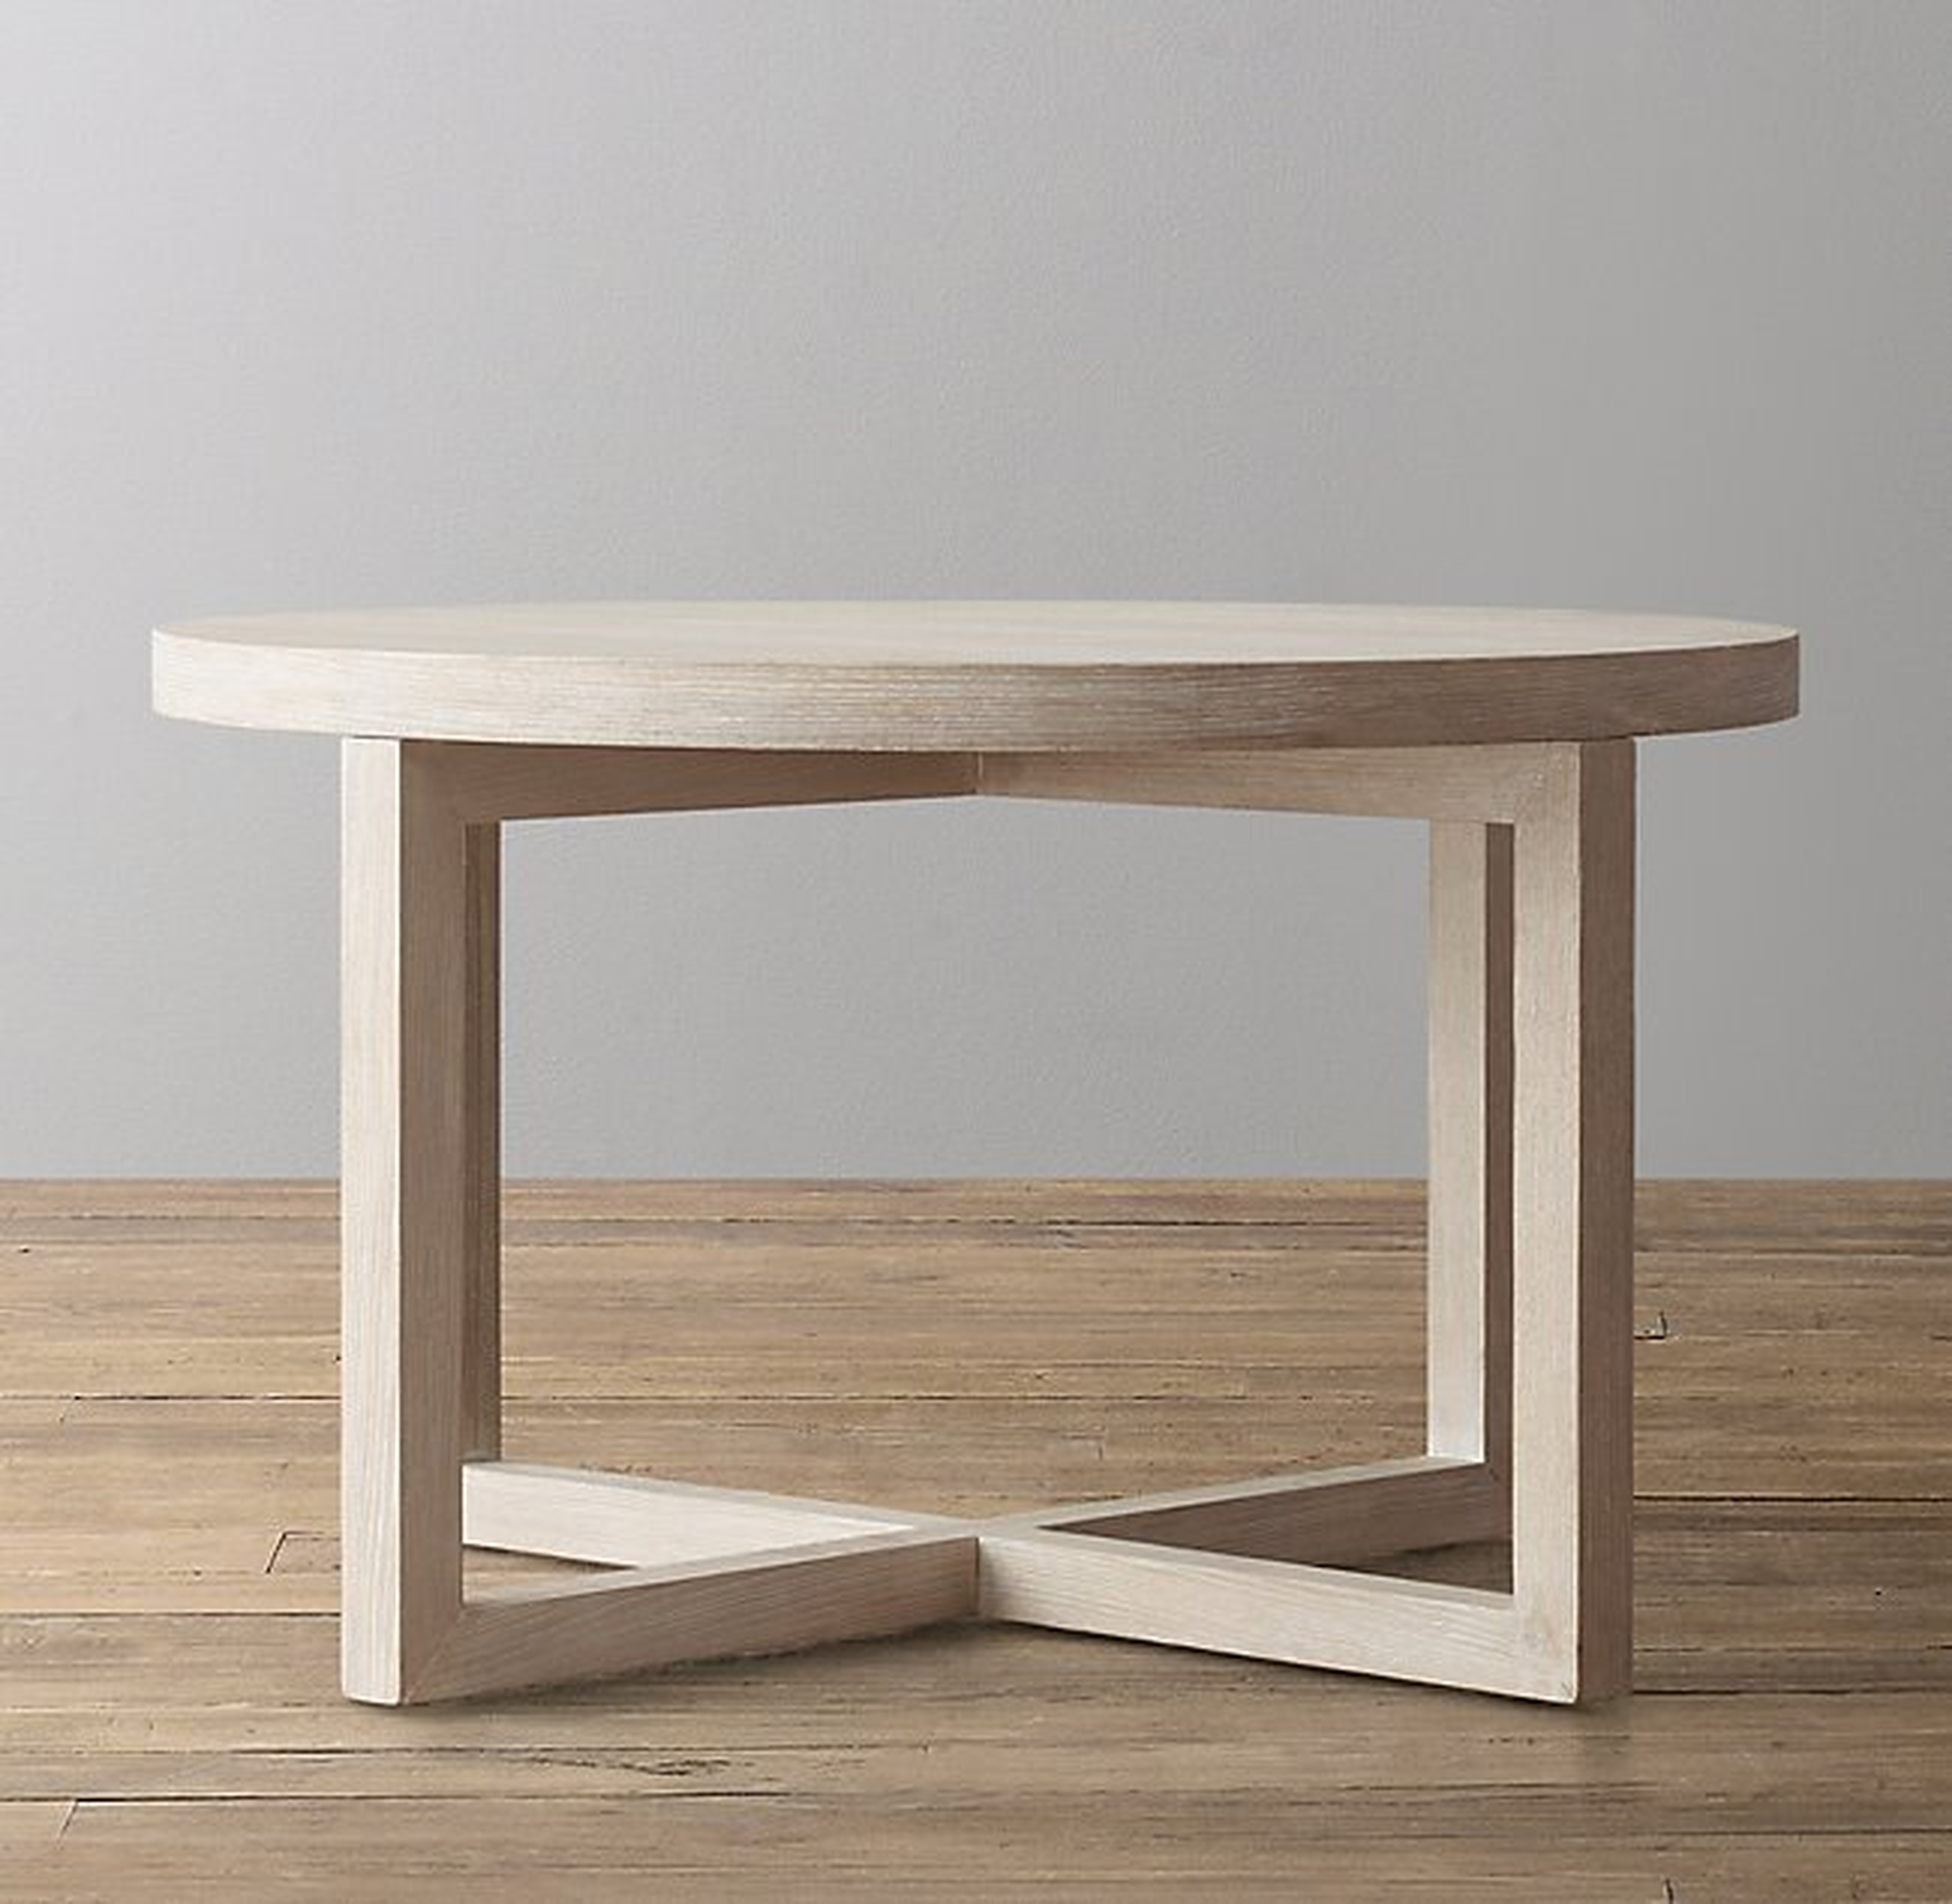 RIGBY ROUND PLAY TABLE - RH Baby & Child